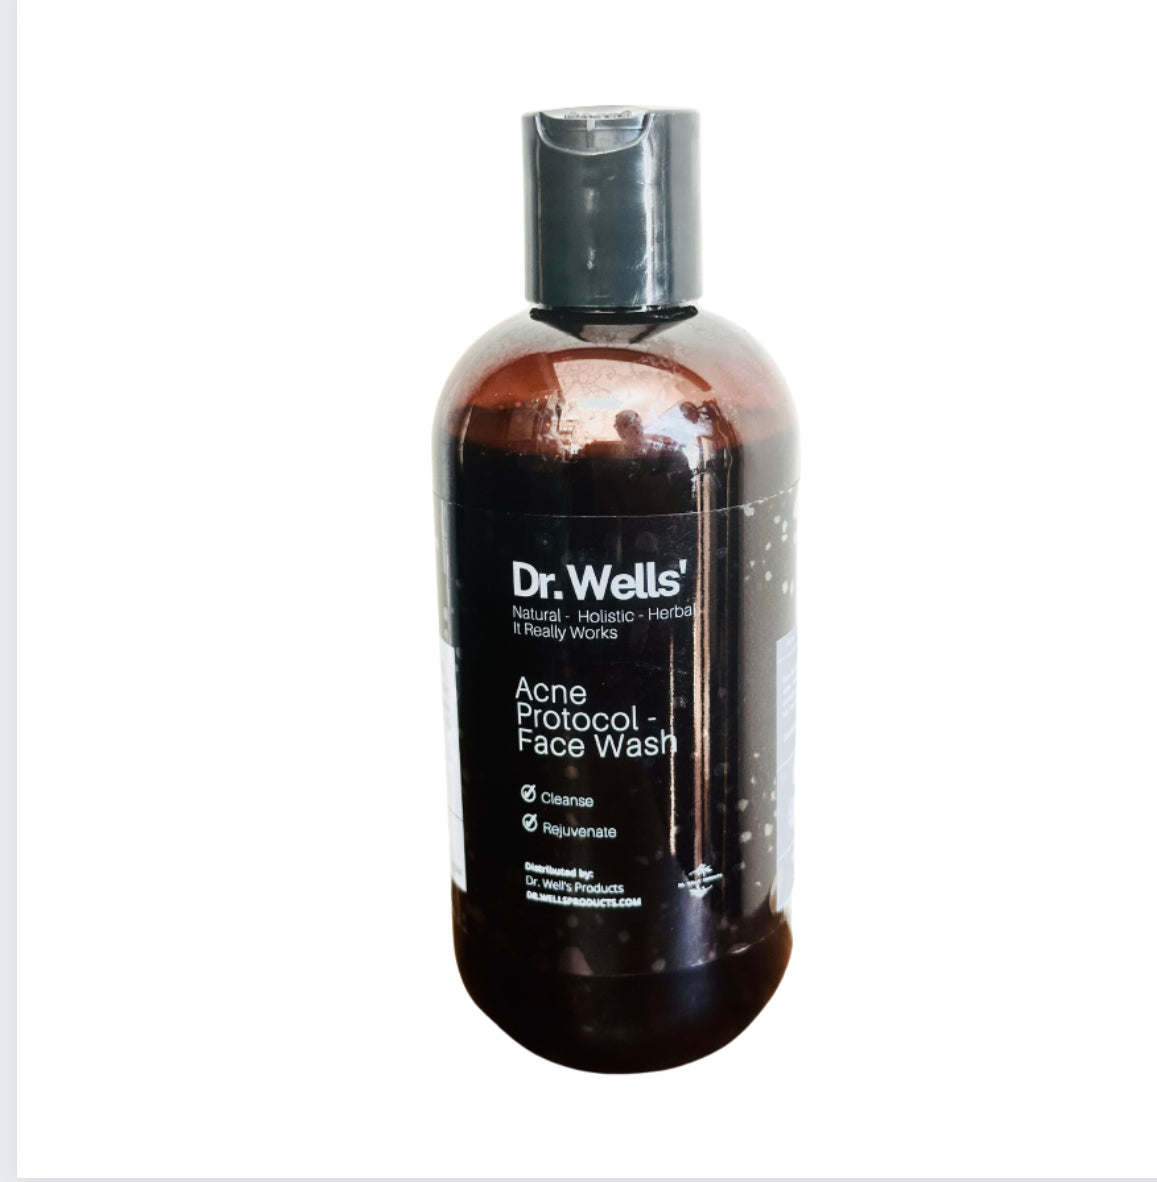 Dr. Wells Acne Protocol - Face Wash